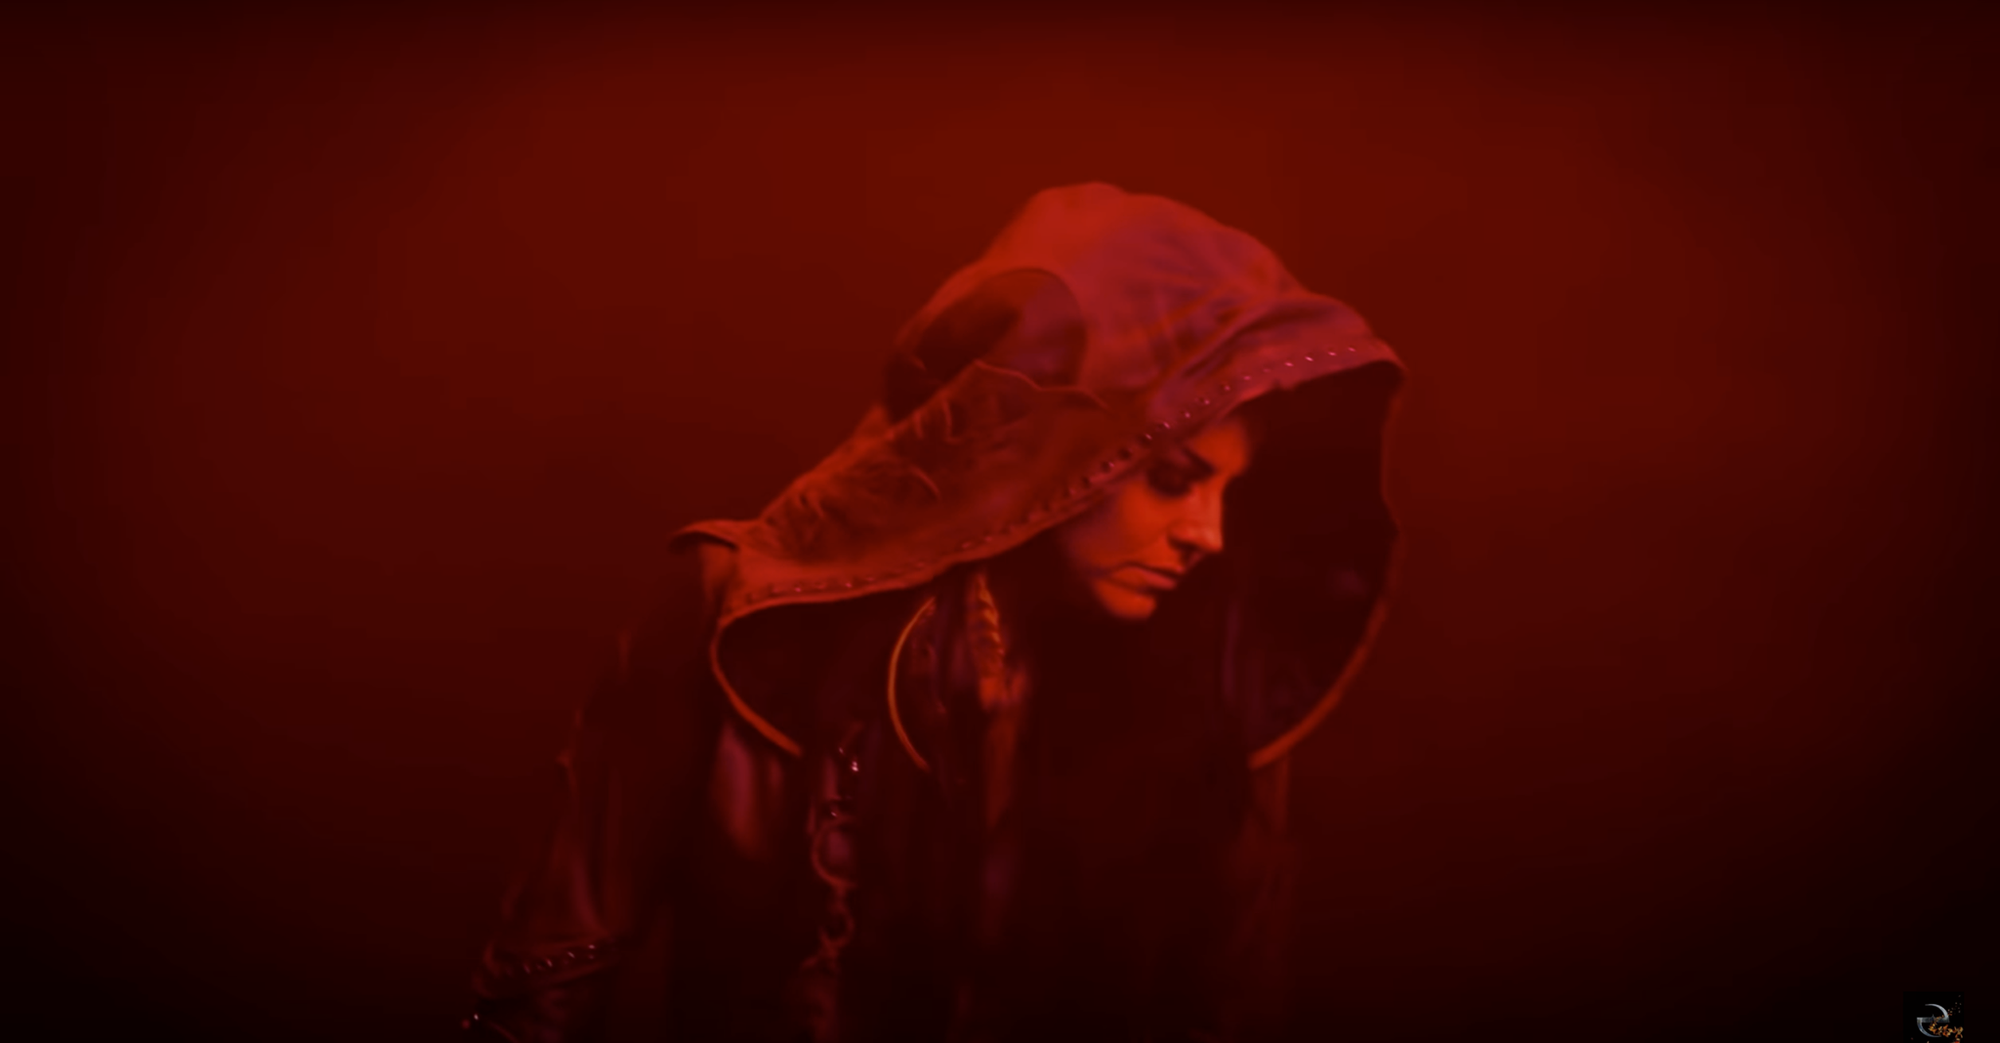 So incredibly honored to have our #RITUAL Venus Jacket featured in the new music video for "The Chain" by Evanescence.